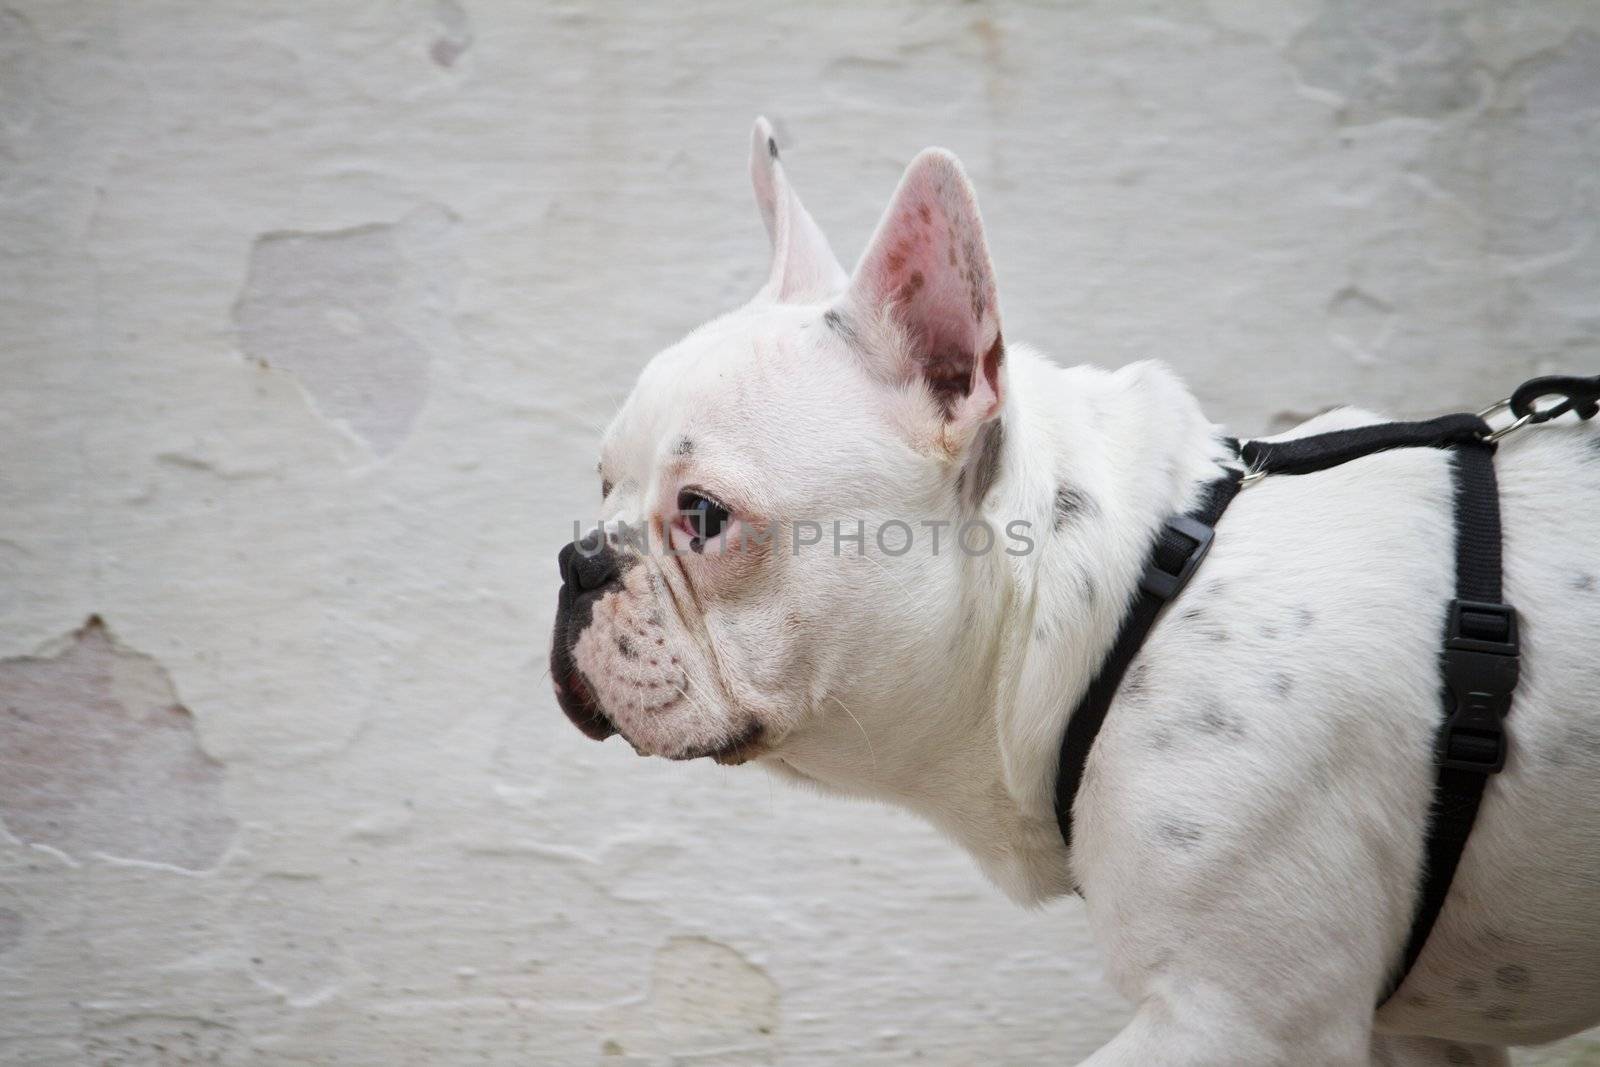 Side profile view of a French bulldog walking on the street.